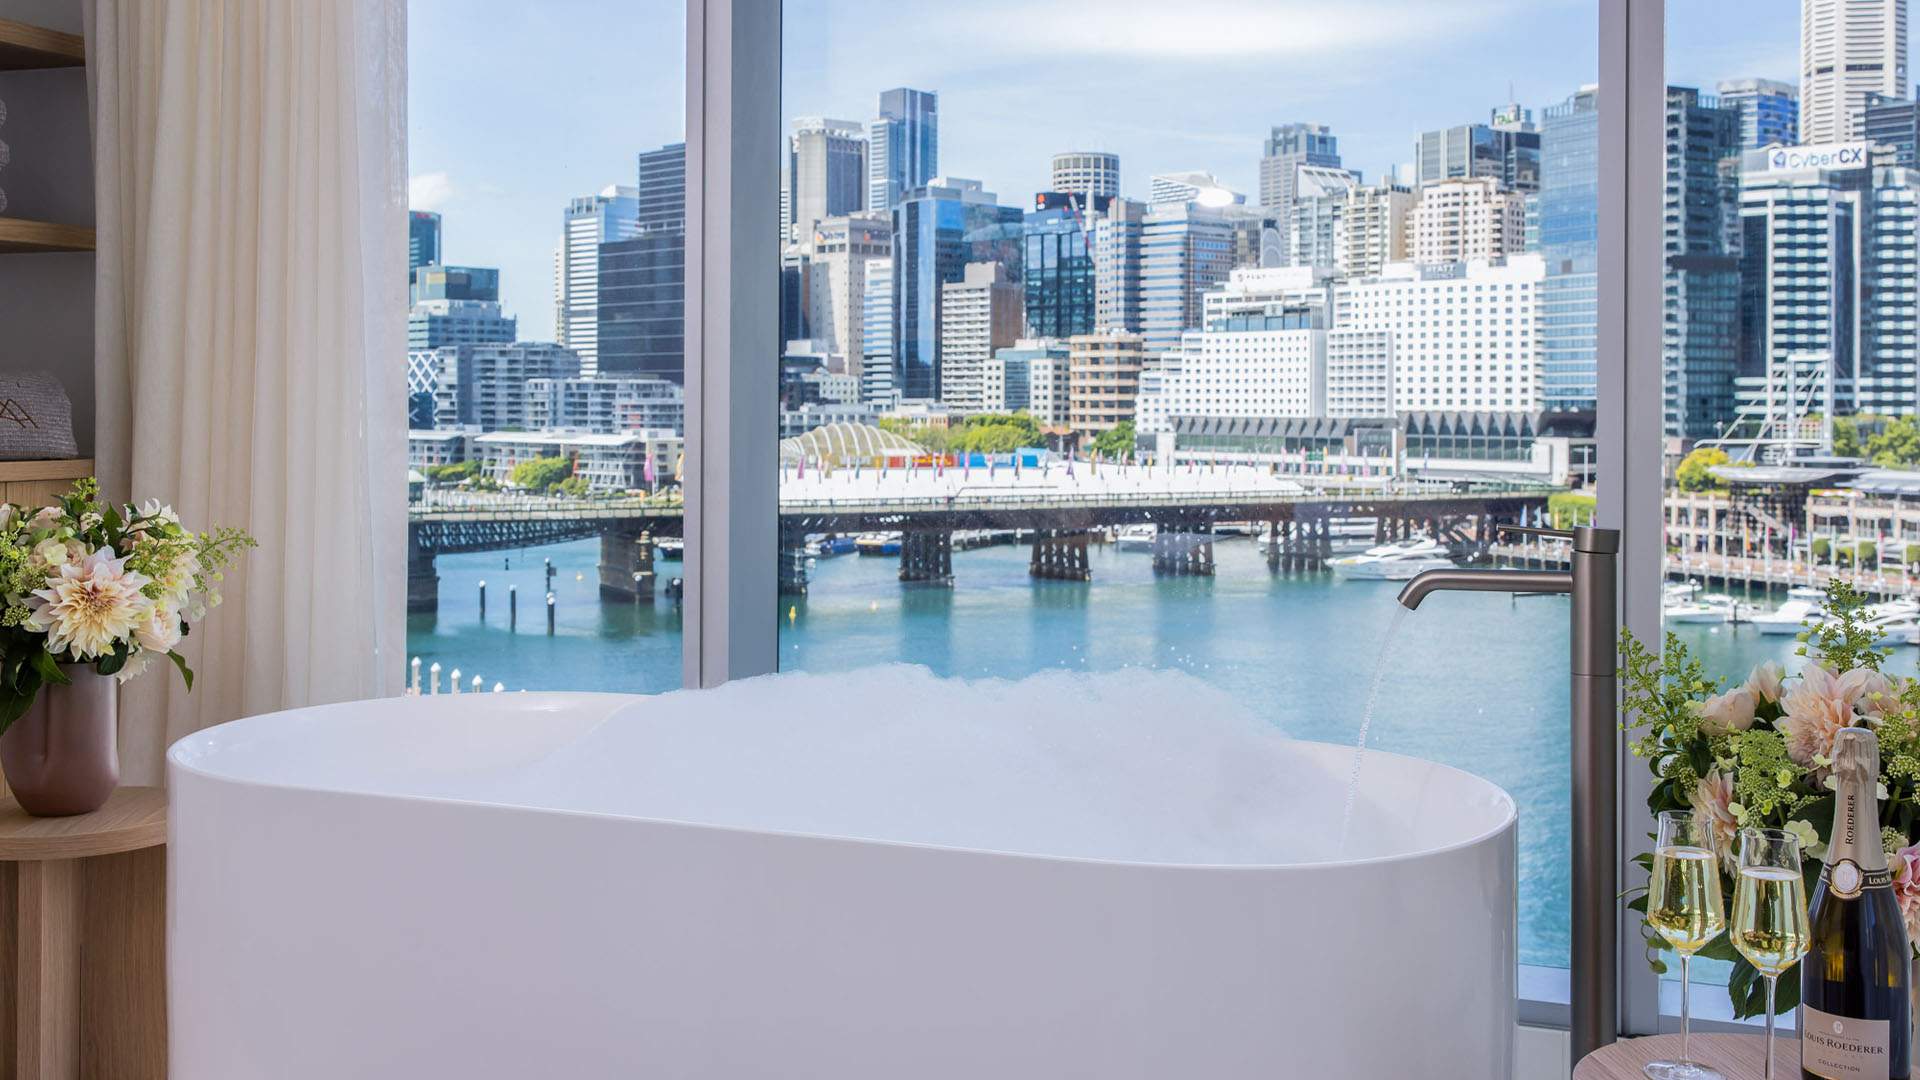 Sofitel SPA Darling Harbour - one of the best day spas in Sydney.